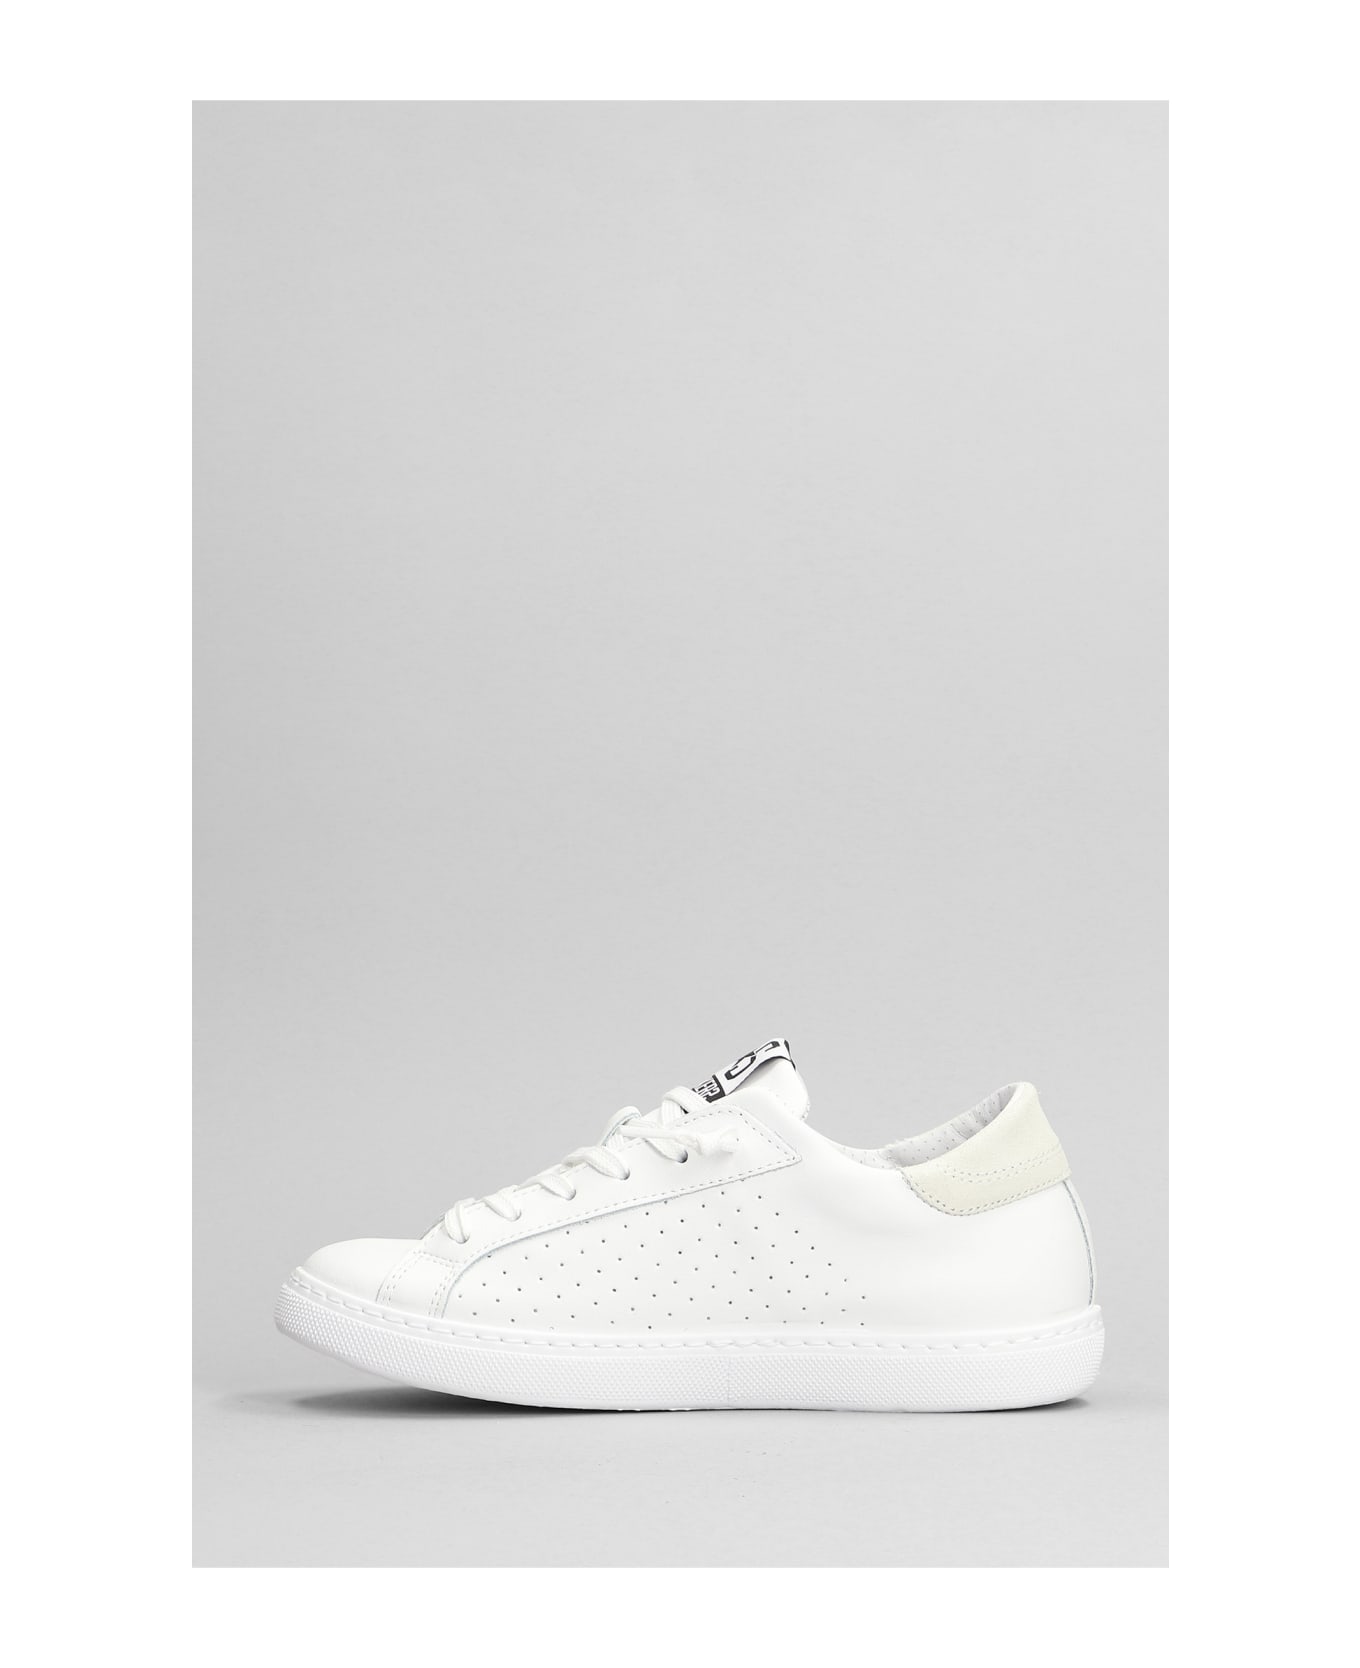 2Star One Star Sneakers In White Suede And Leather - white